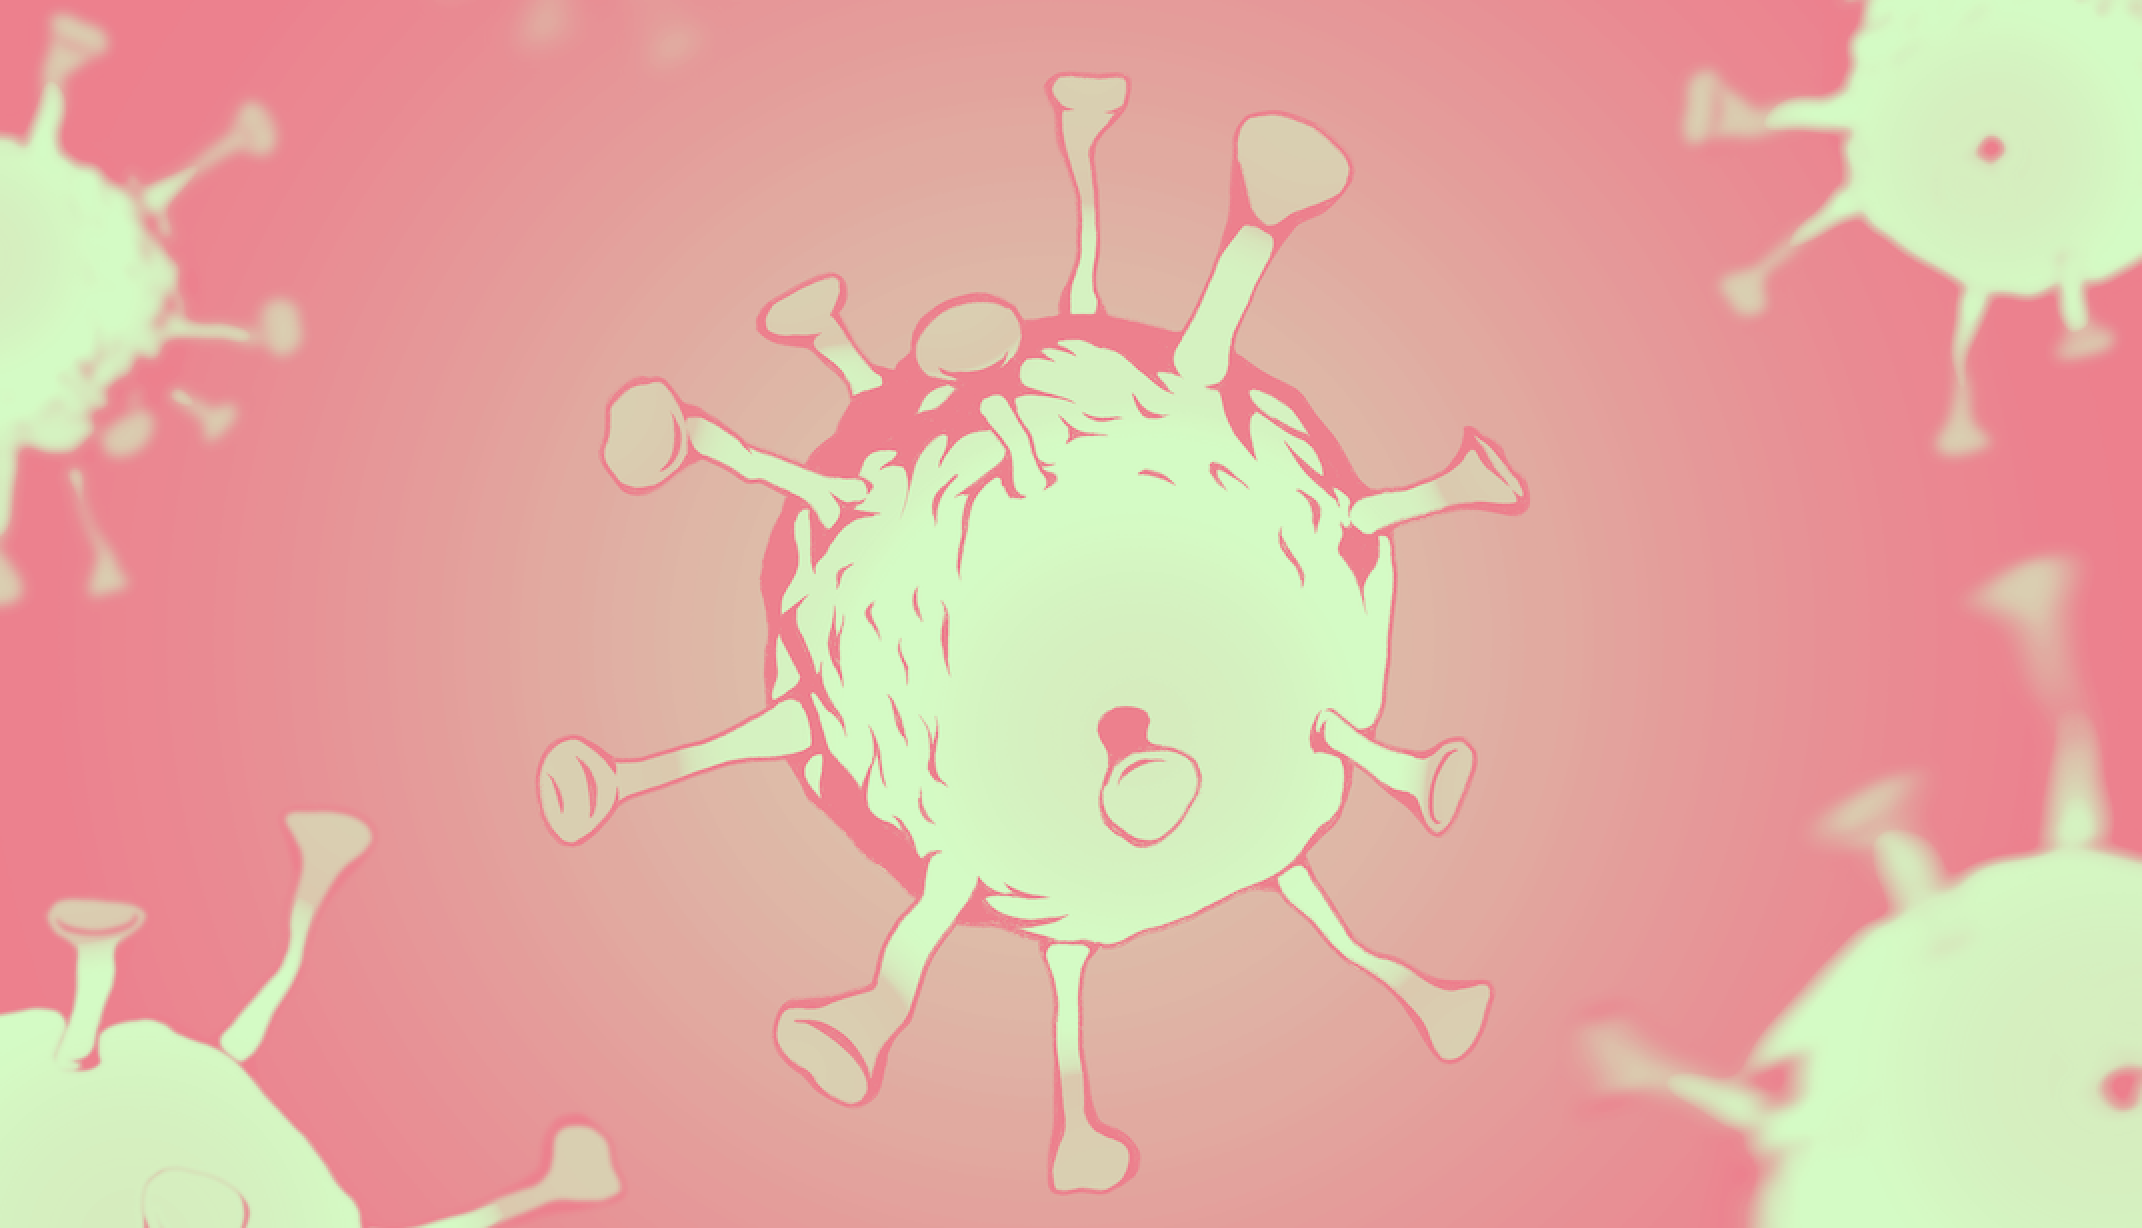 A SARS-CoV-2 virus, depicted in neon green against a peach background